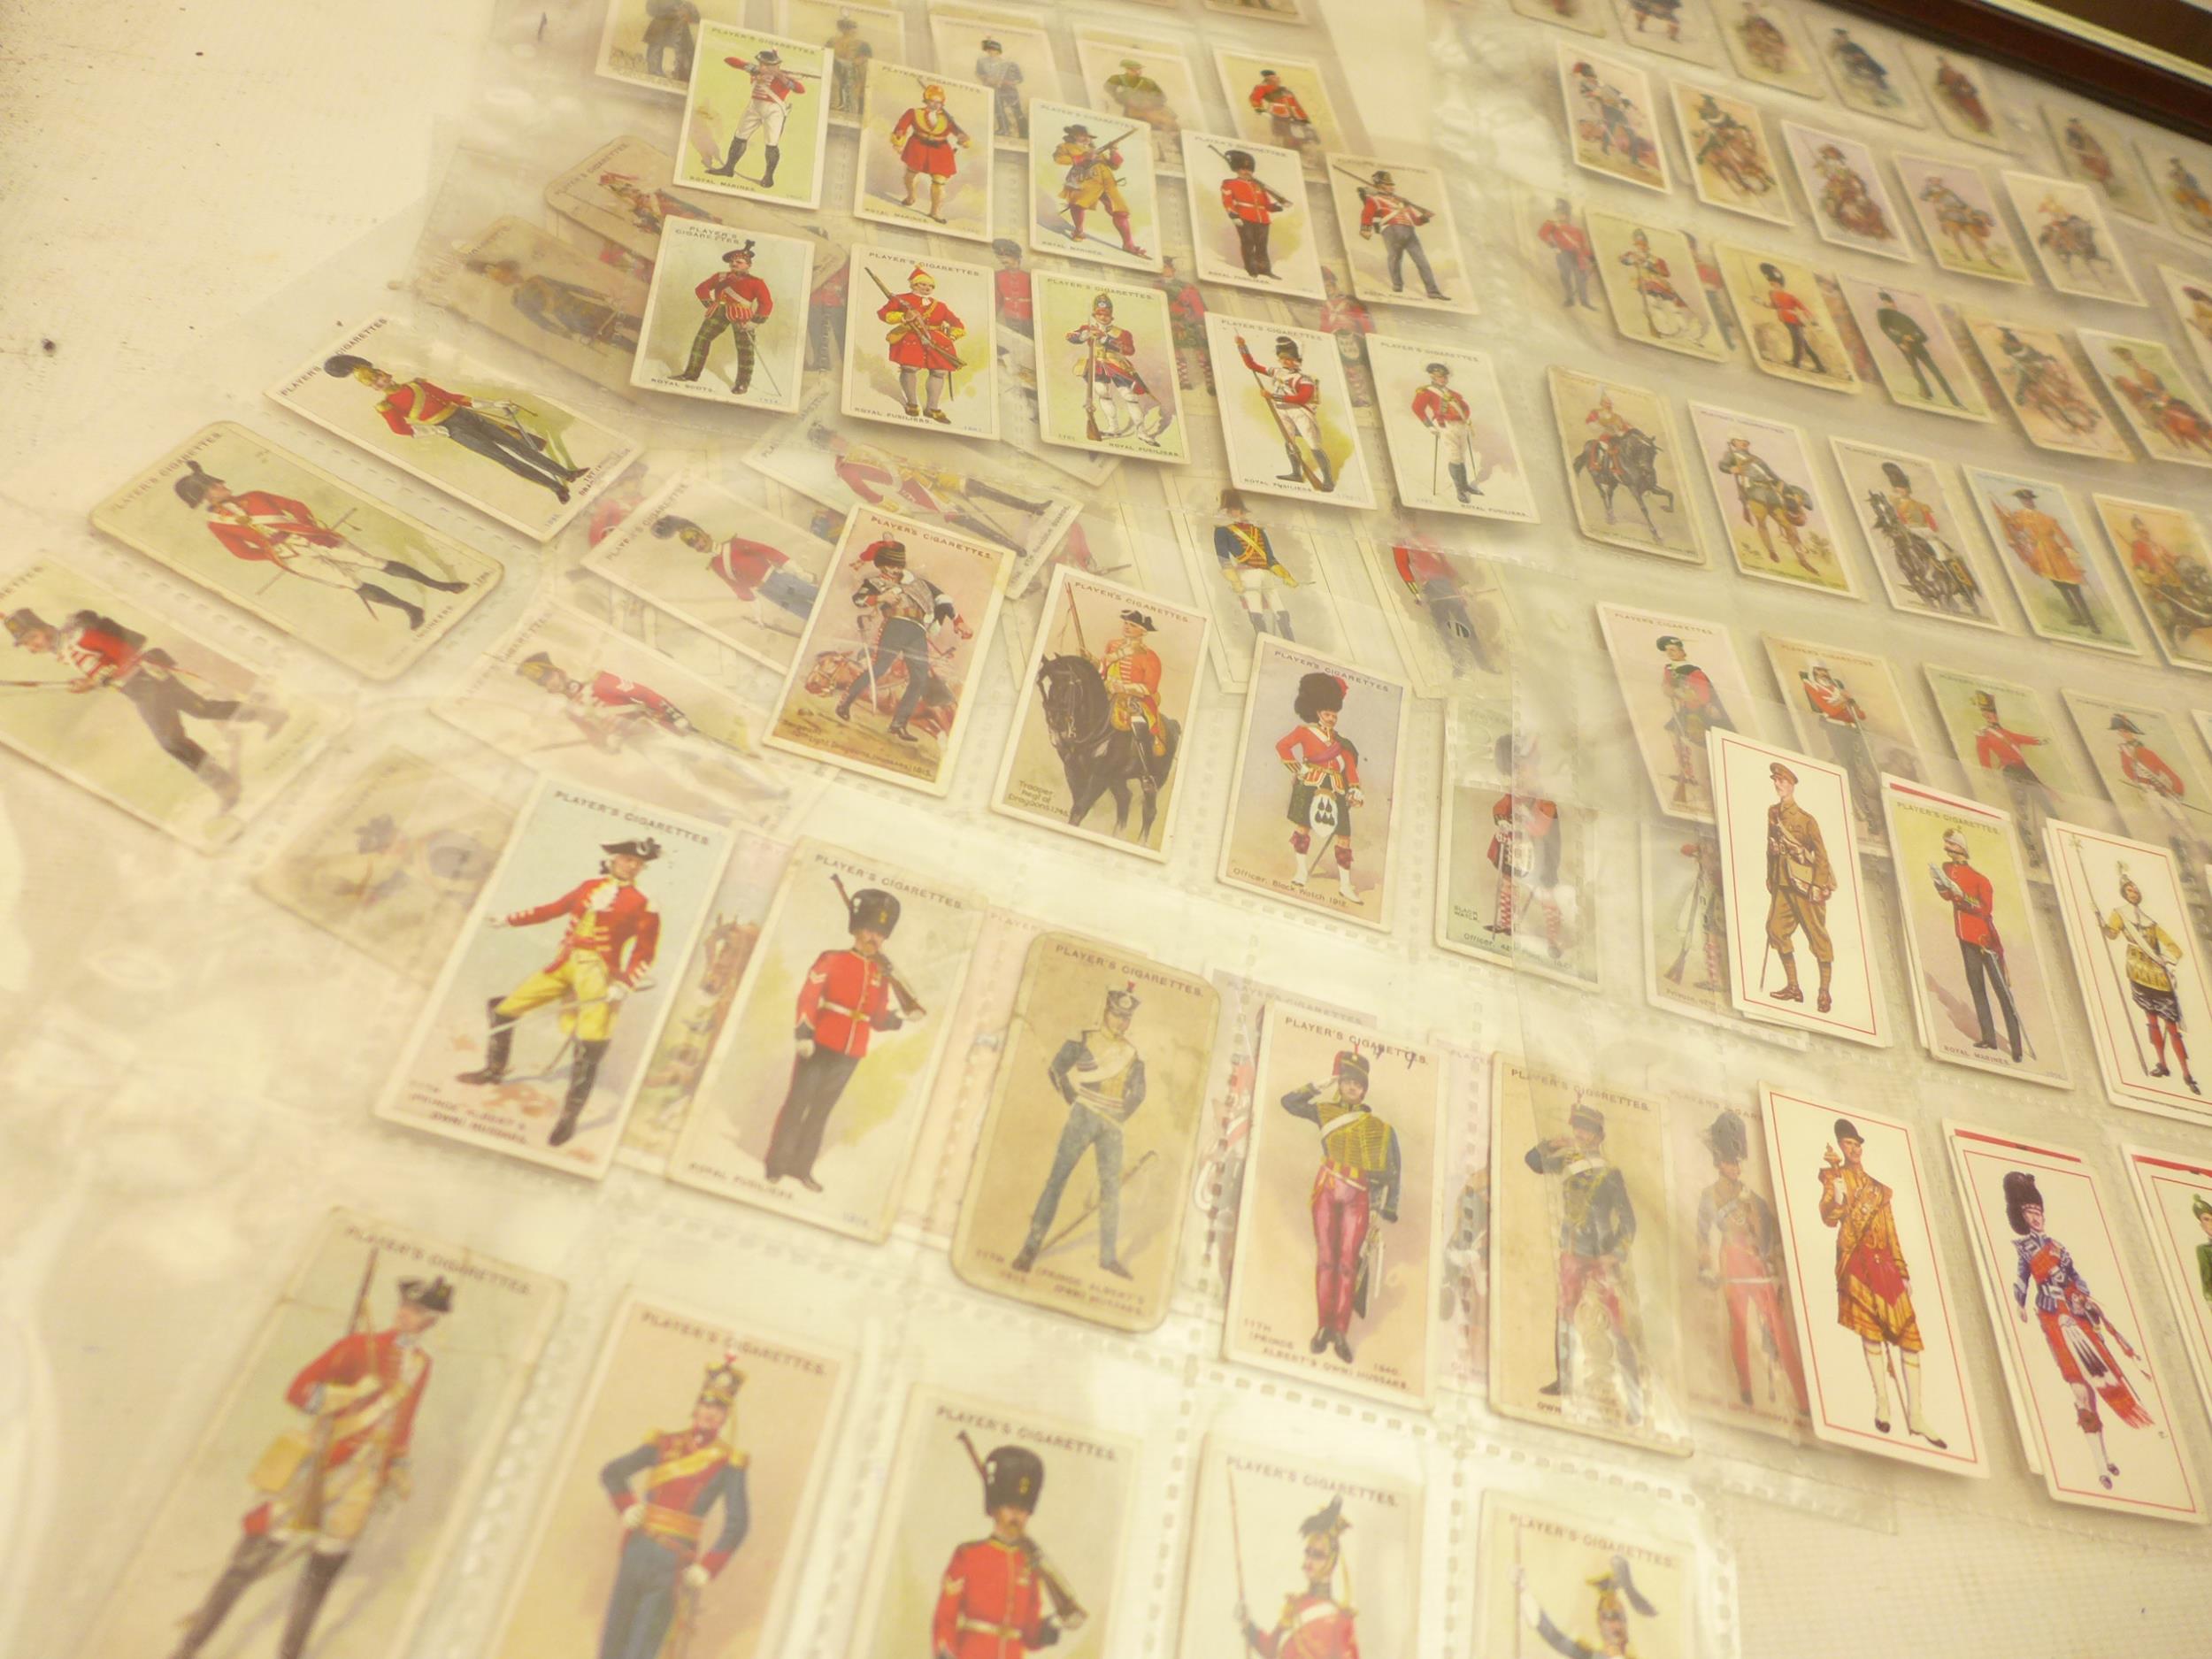 TWO FRAMED PLAYERS CIGARETTE CARDS RELATING TO THE MILITARY, PLUS VARIOUS SIMILAR SUBJECT SHEETS - Image 6 of 6